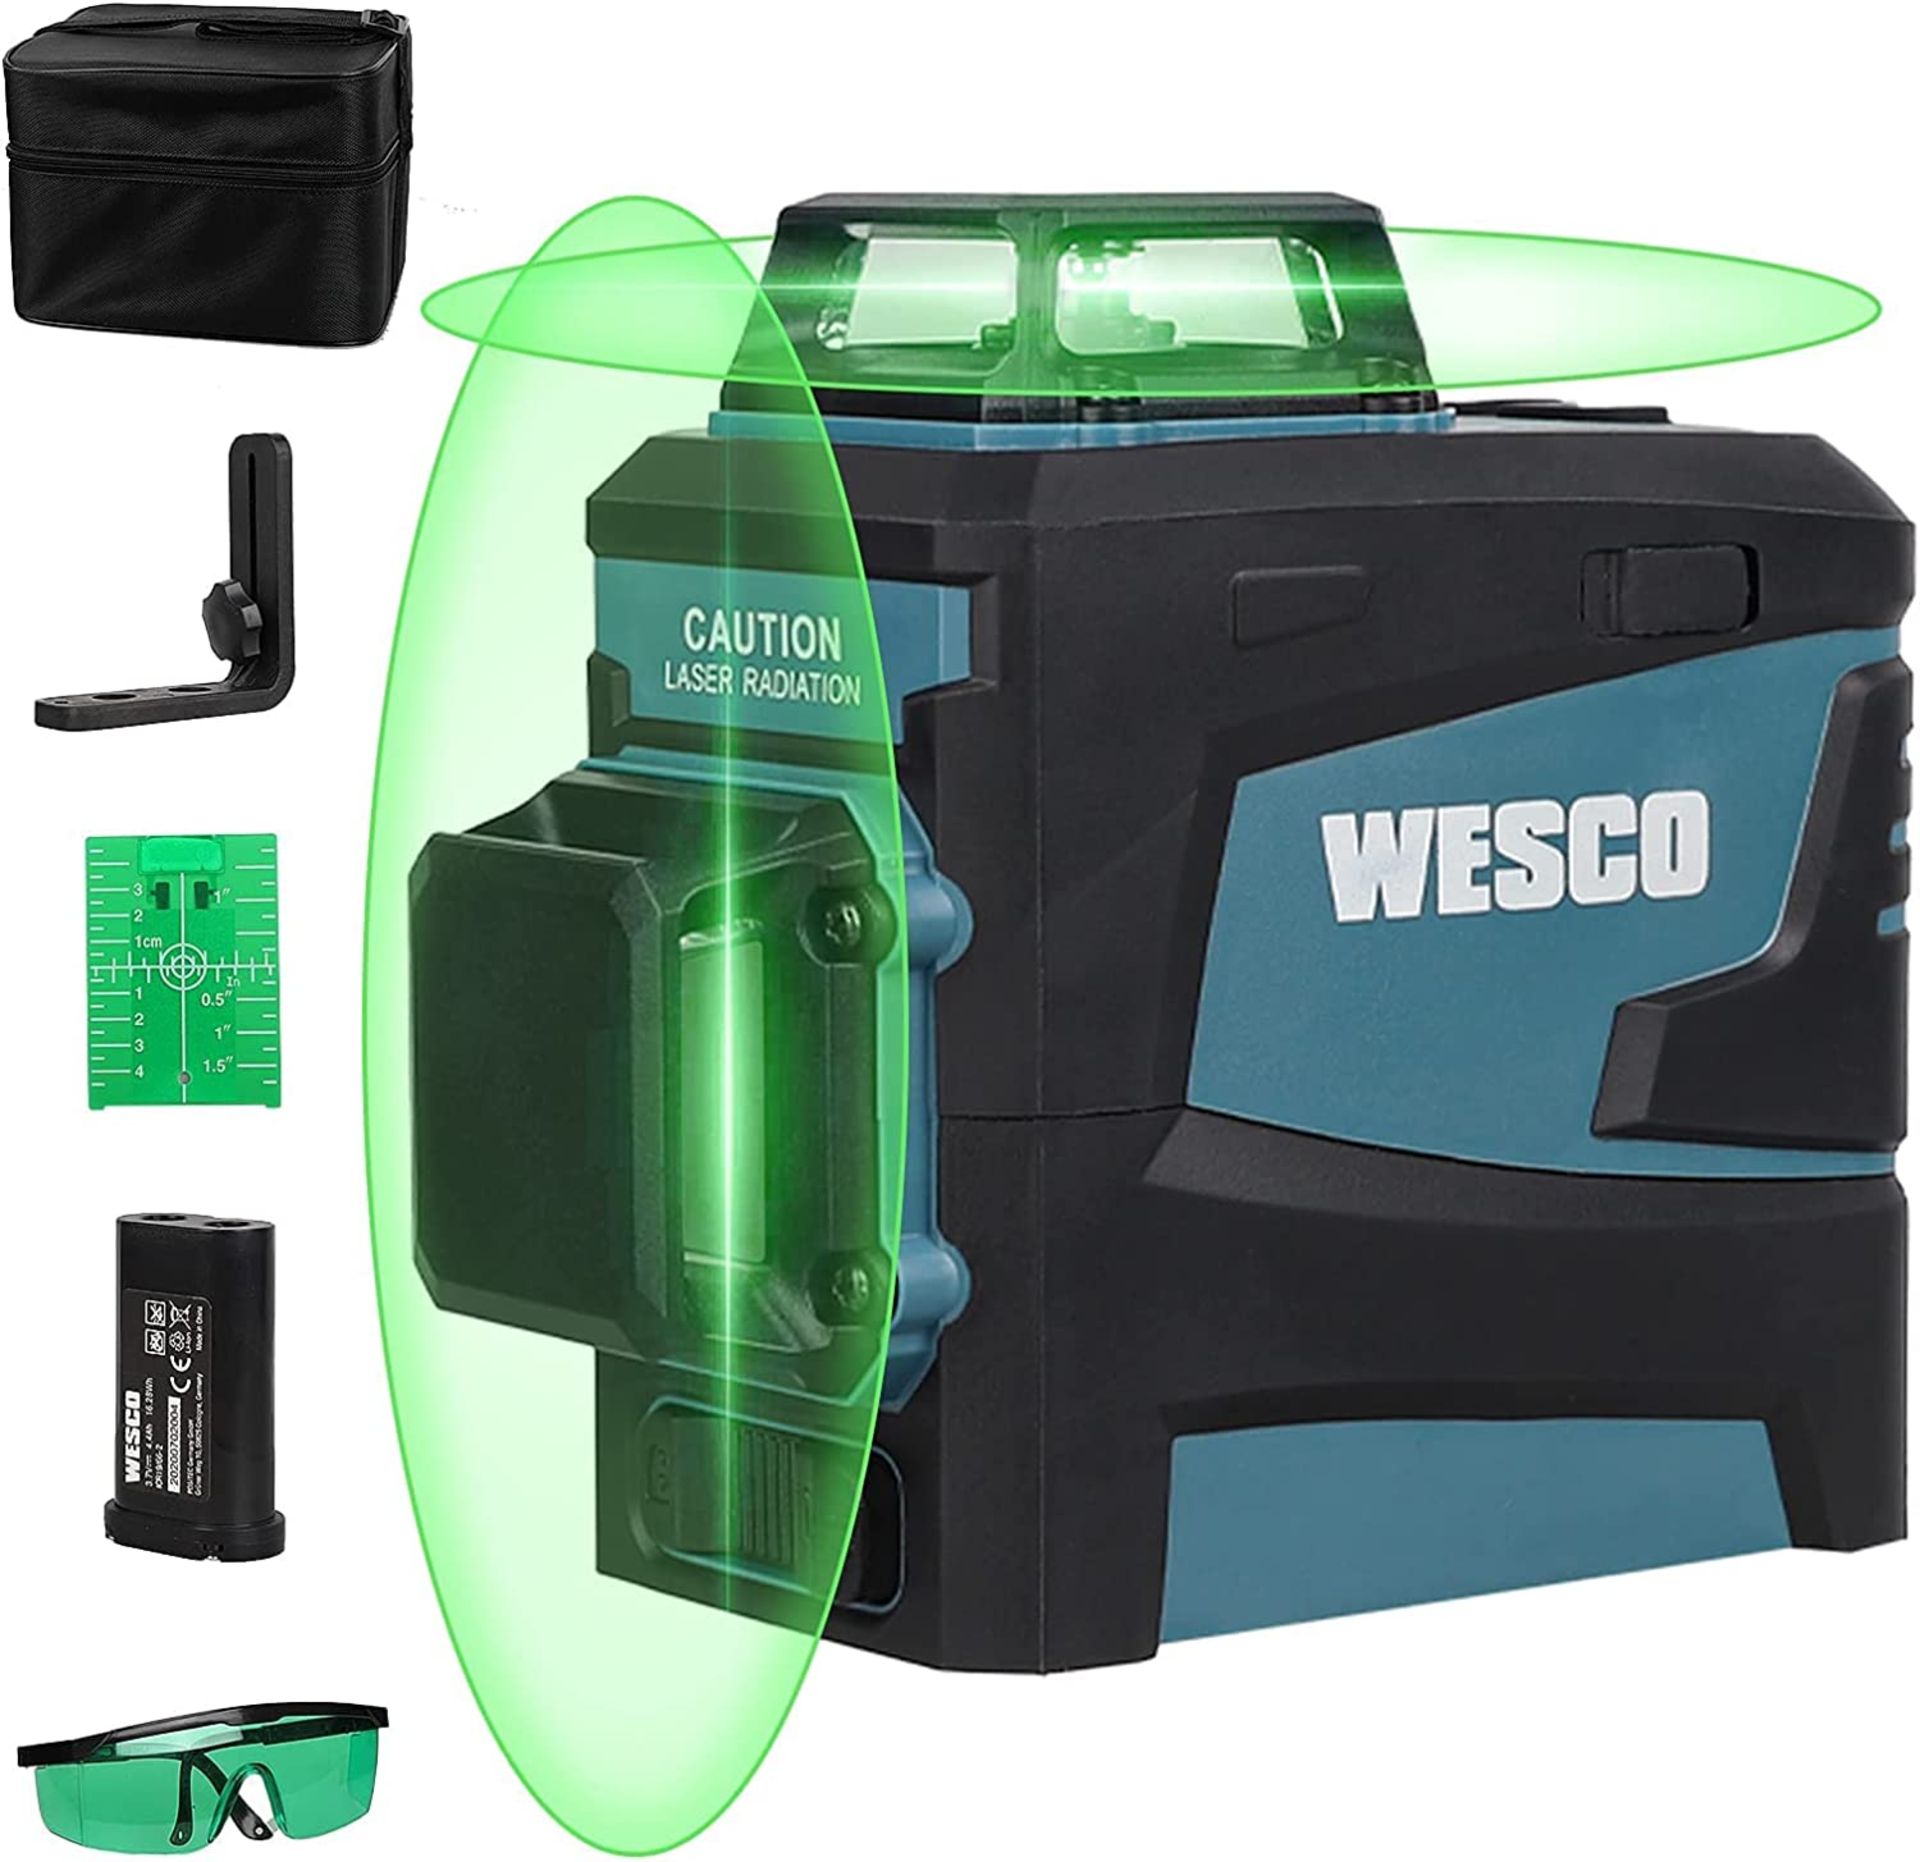 TRADE LOT 8 x NEW & BOXED WESCO Laser Level Green, 3D 2X 360° Lines Laser, 8 Lines Self Leveling